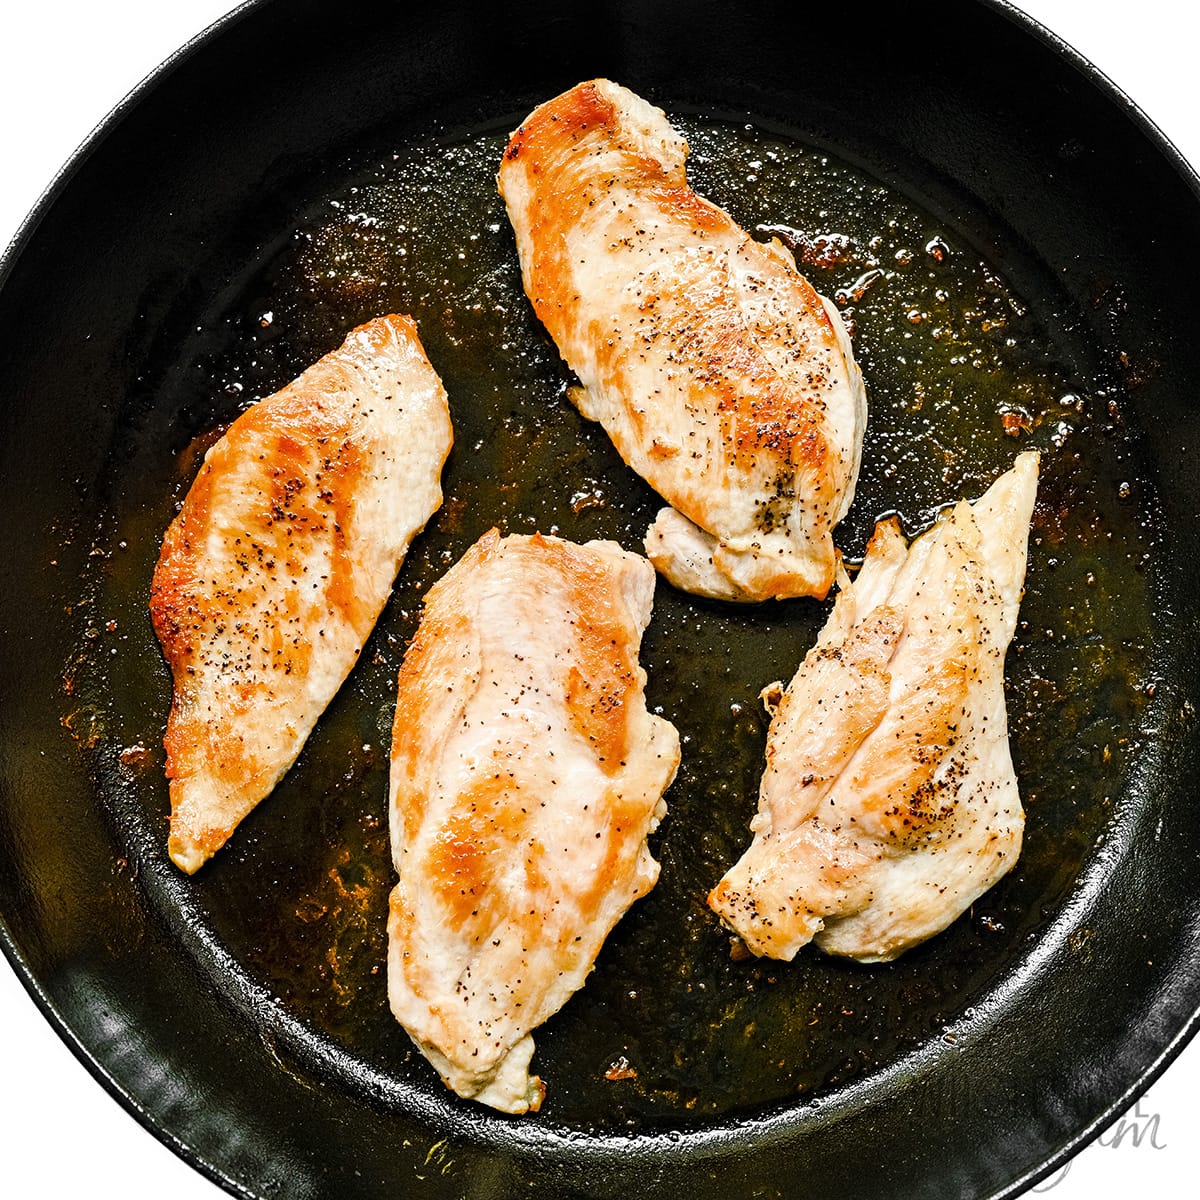 Chicken breasts searing in cast iron skillet.